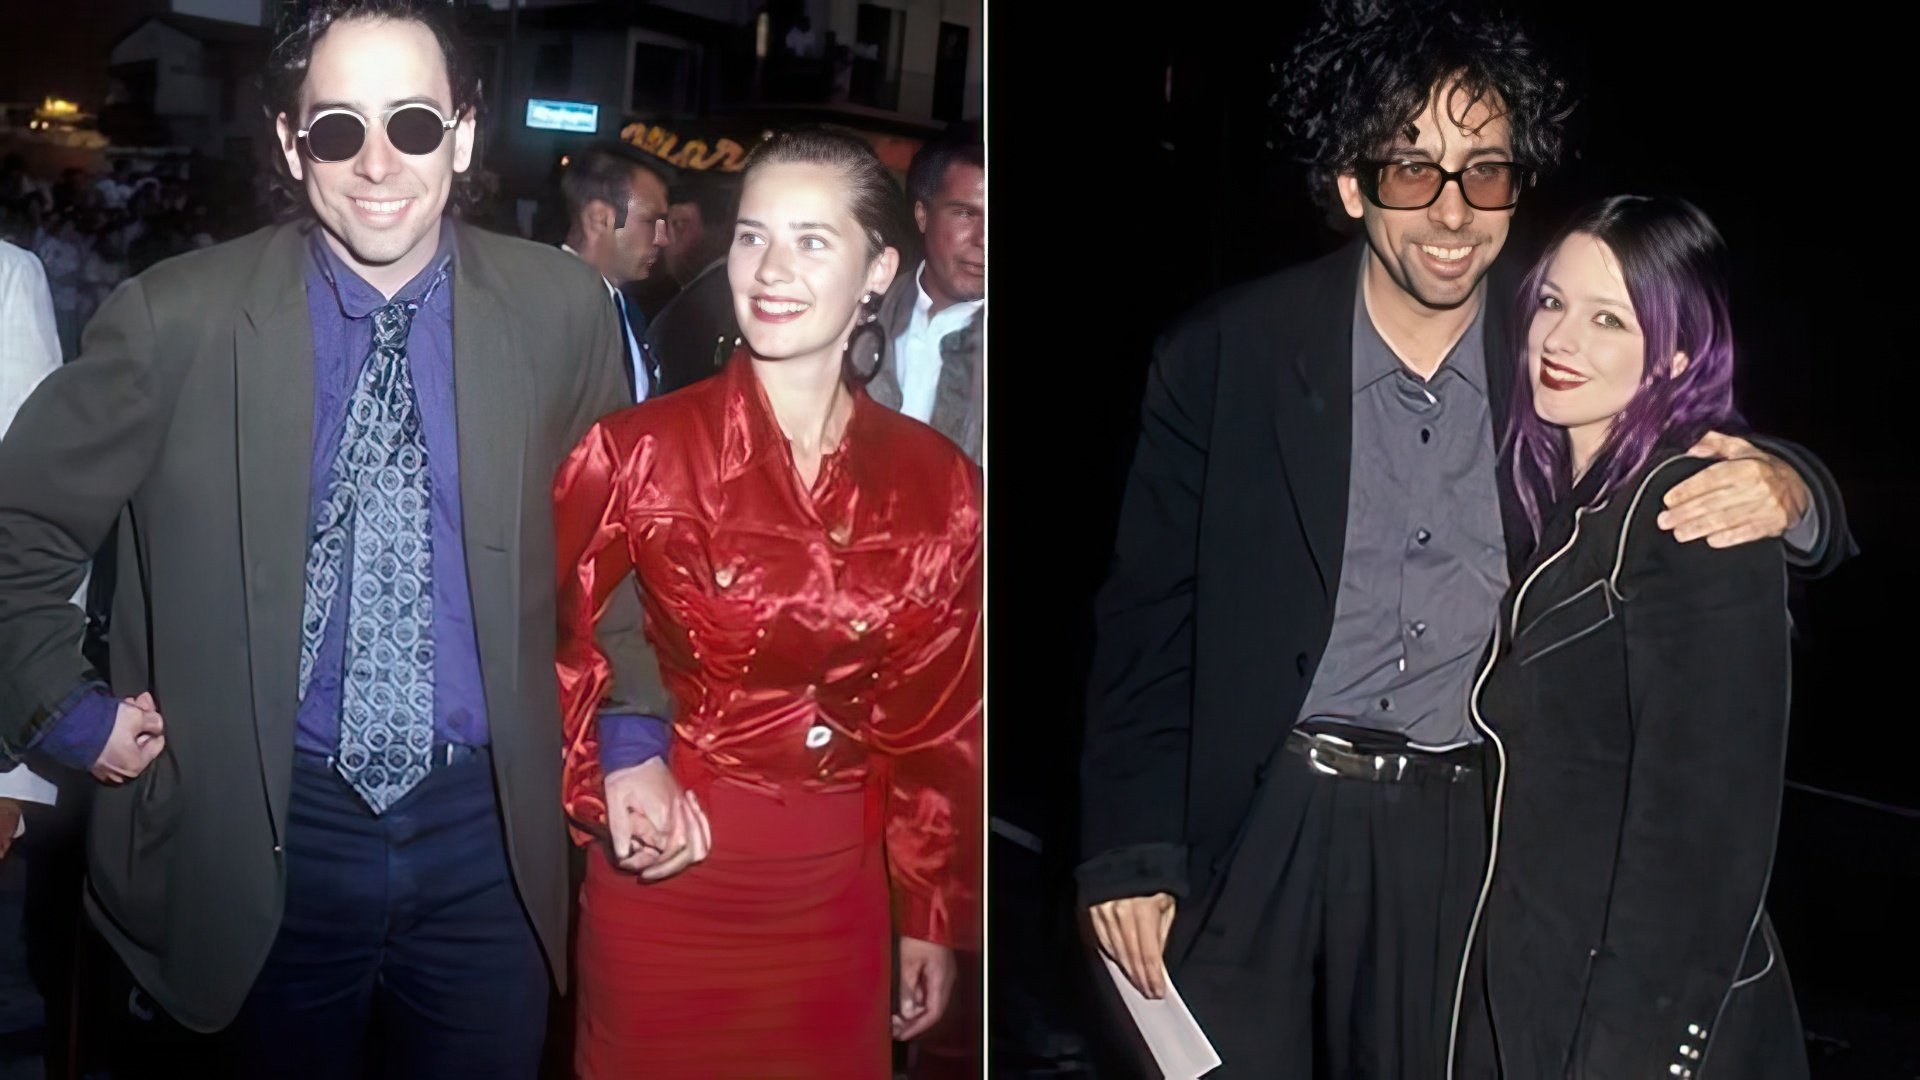 Tim Burton with Lena Gieseke and Lisa Marie (photo from the right)